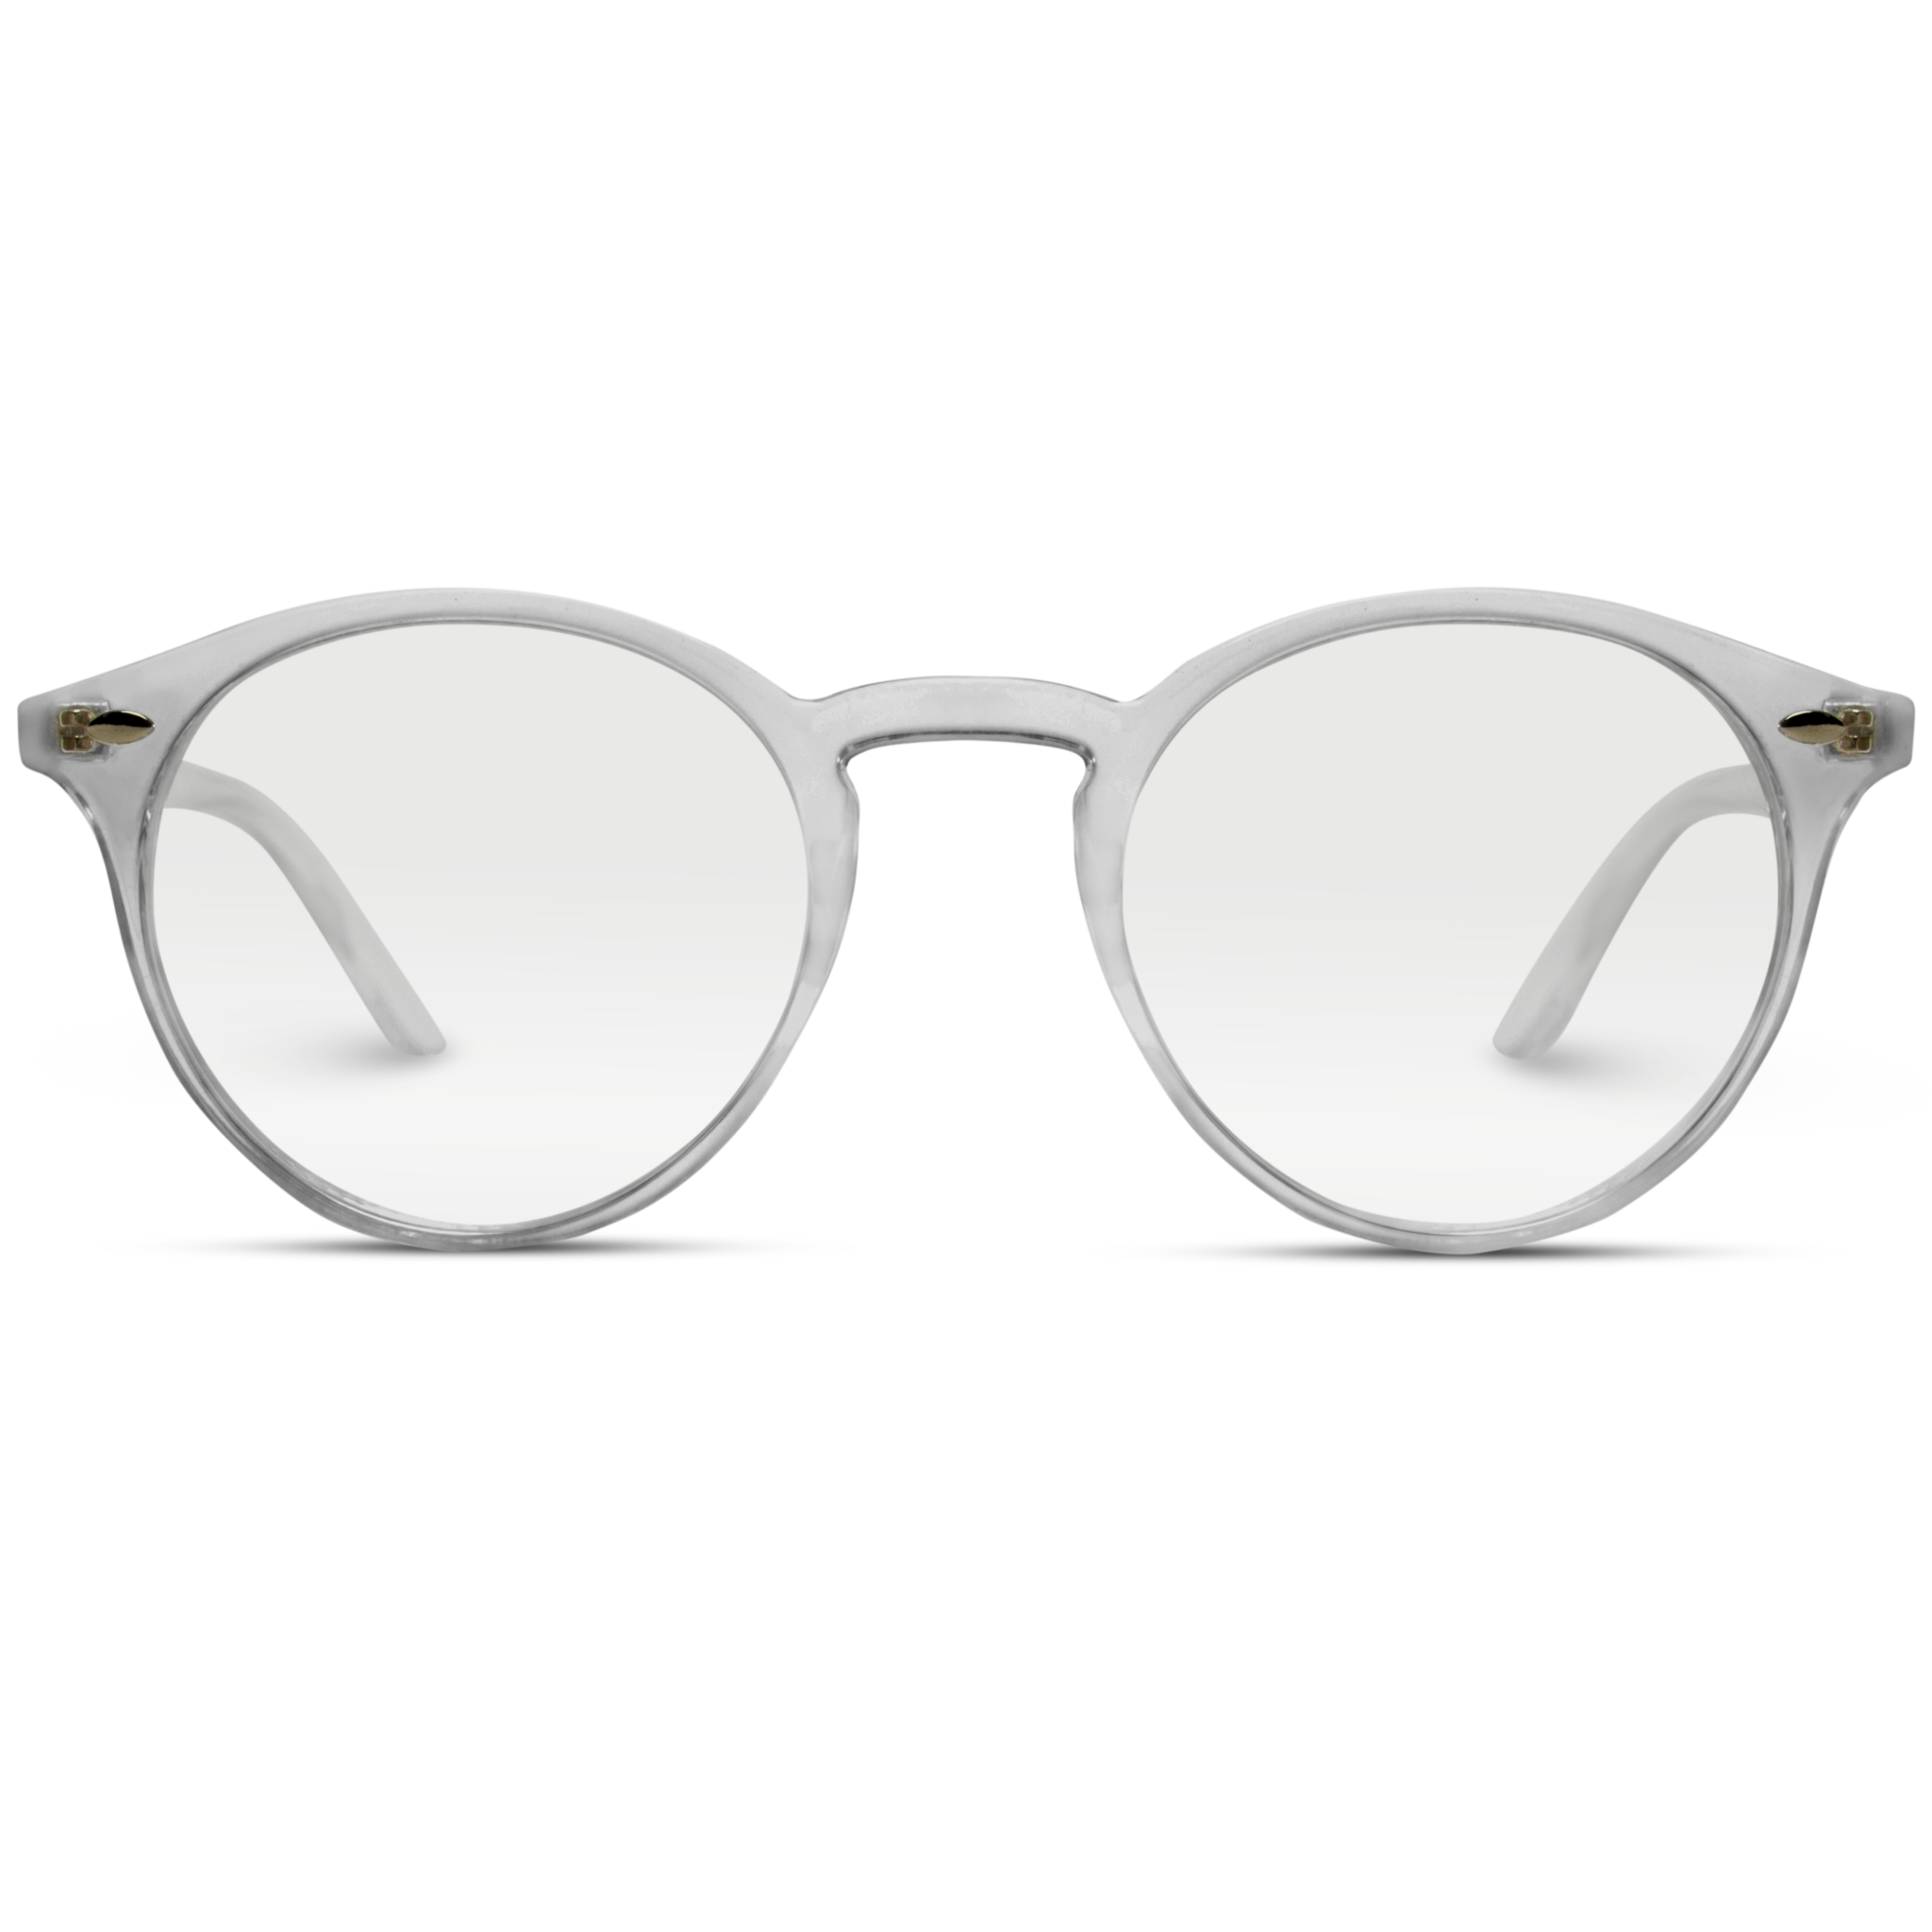 Sunglasses Ray-Ban 6406 Clothing Accessories - glasses transparent